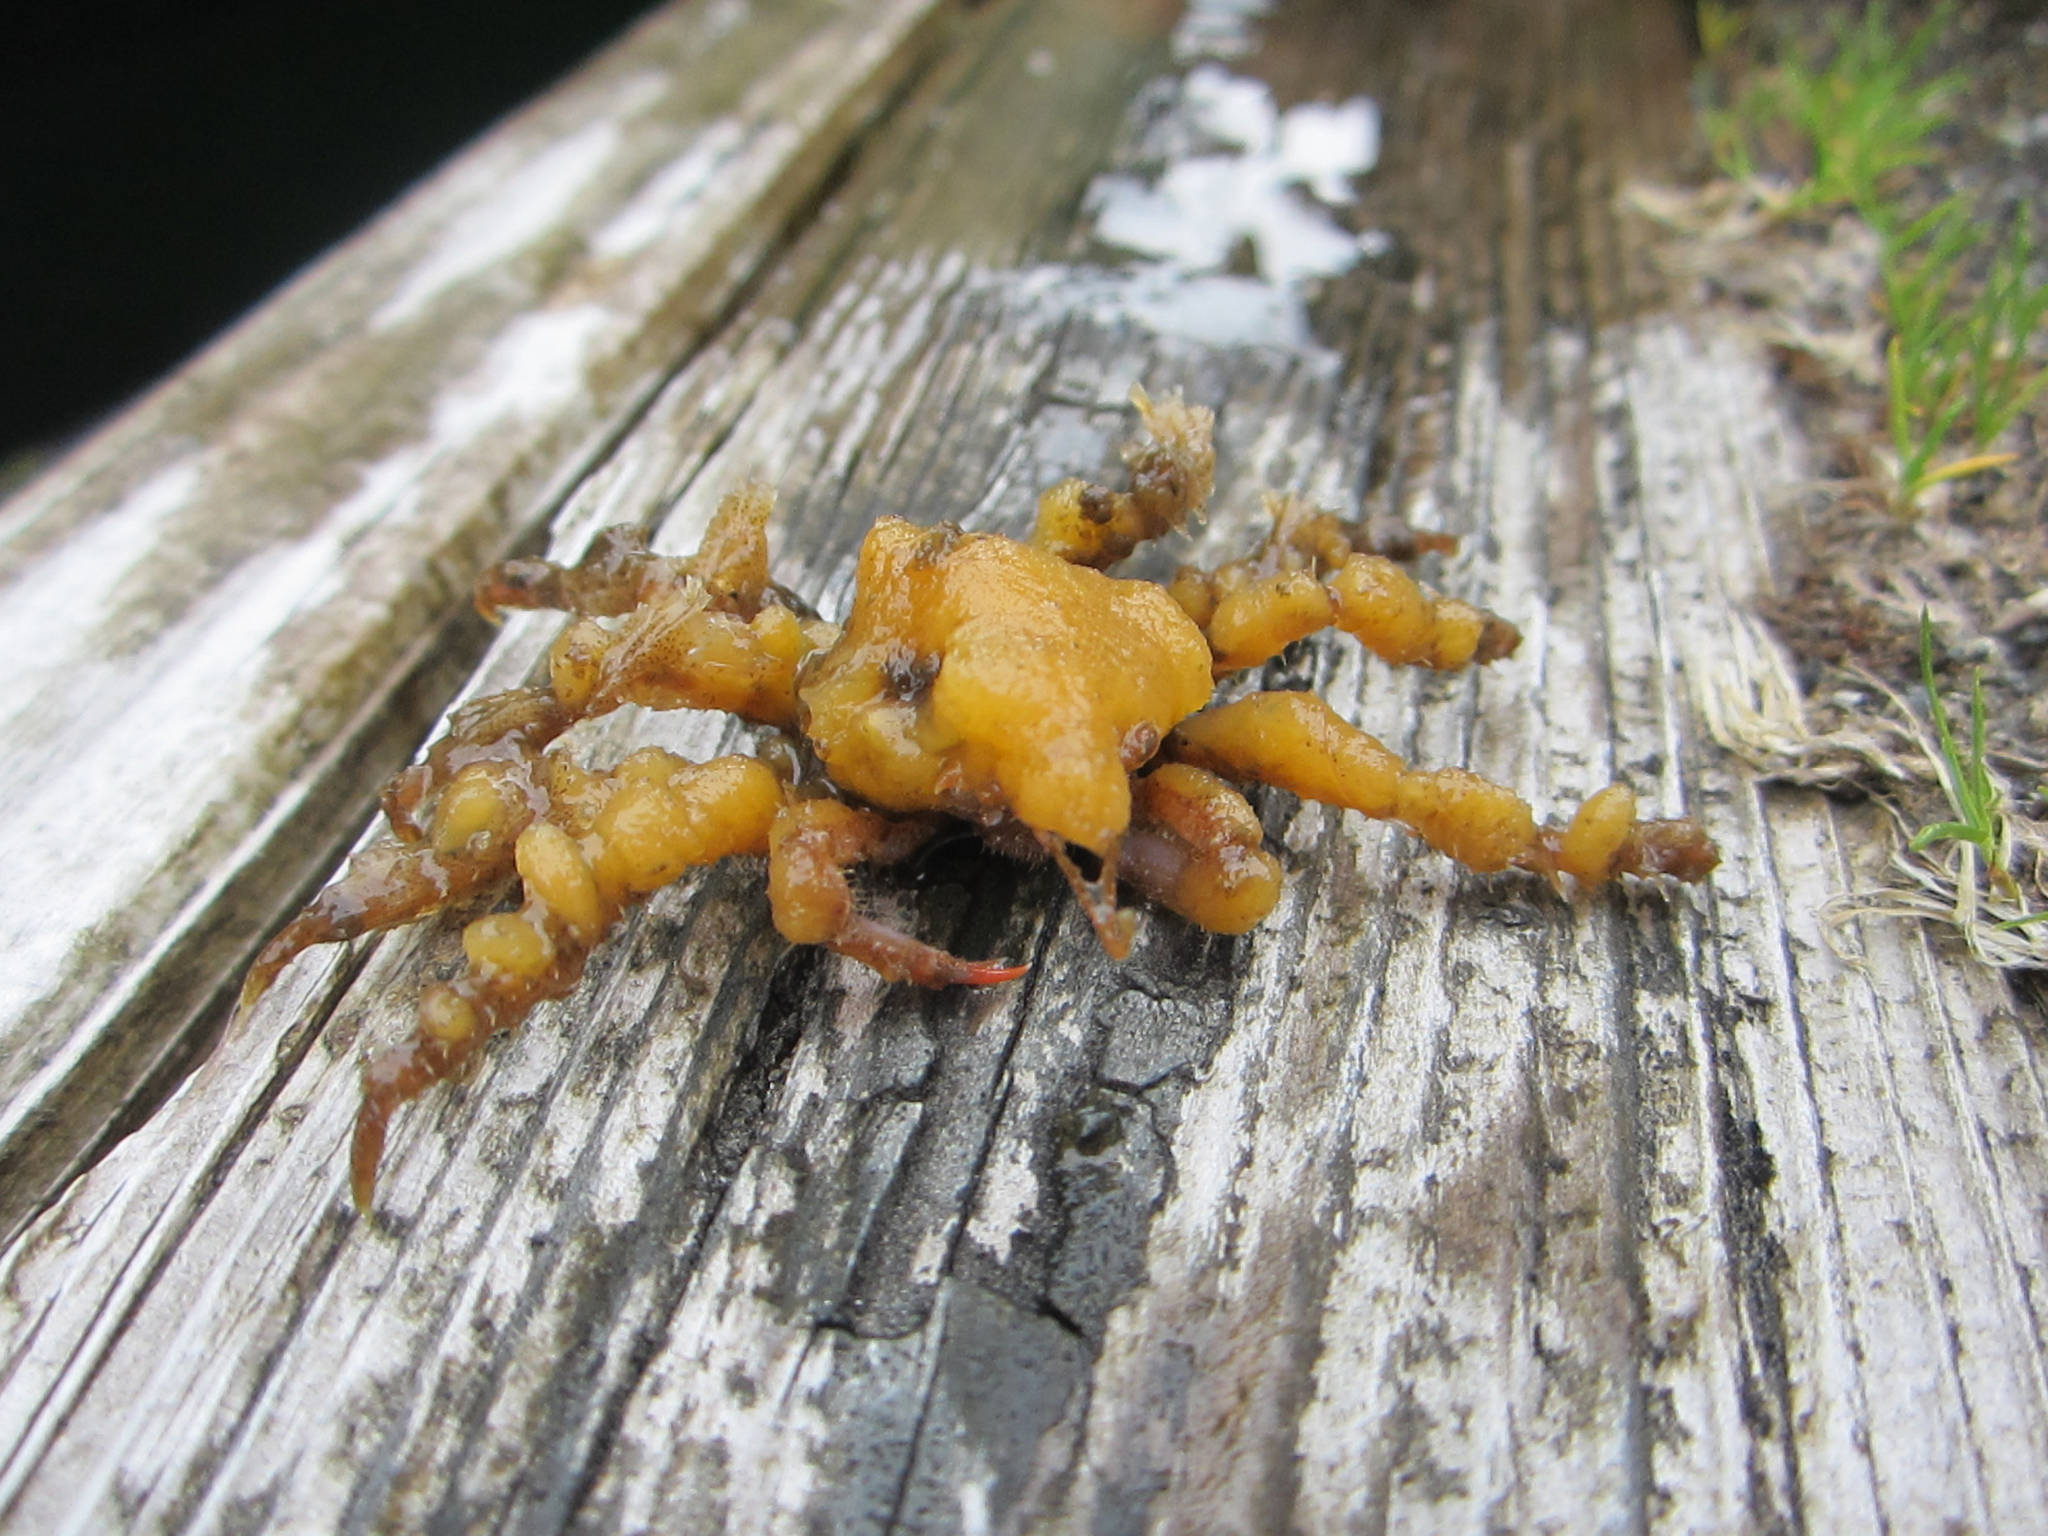 A crab covered in Botrylloides, found in Ketchikan. (Courtesy Photo | Gary Freitag via University of Alaska)